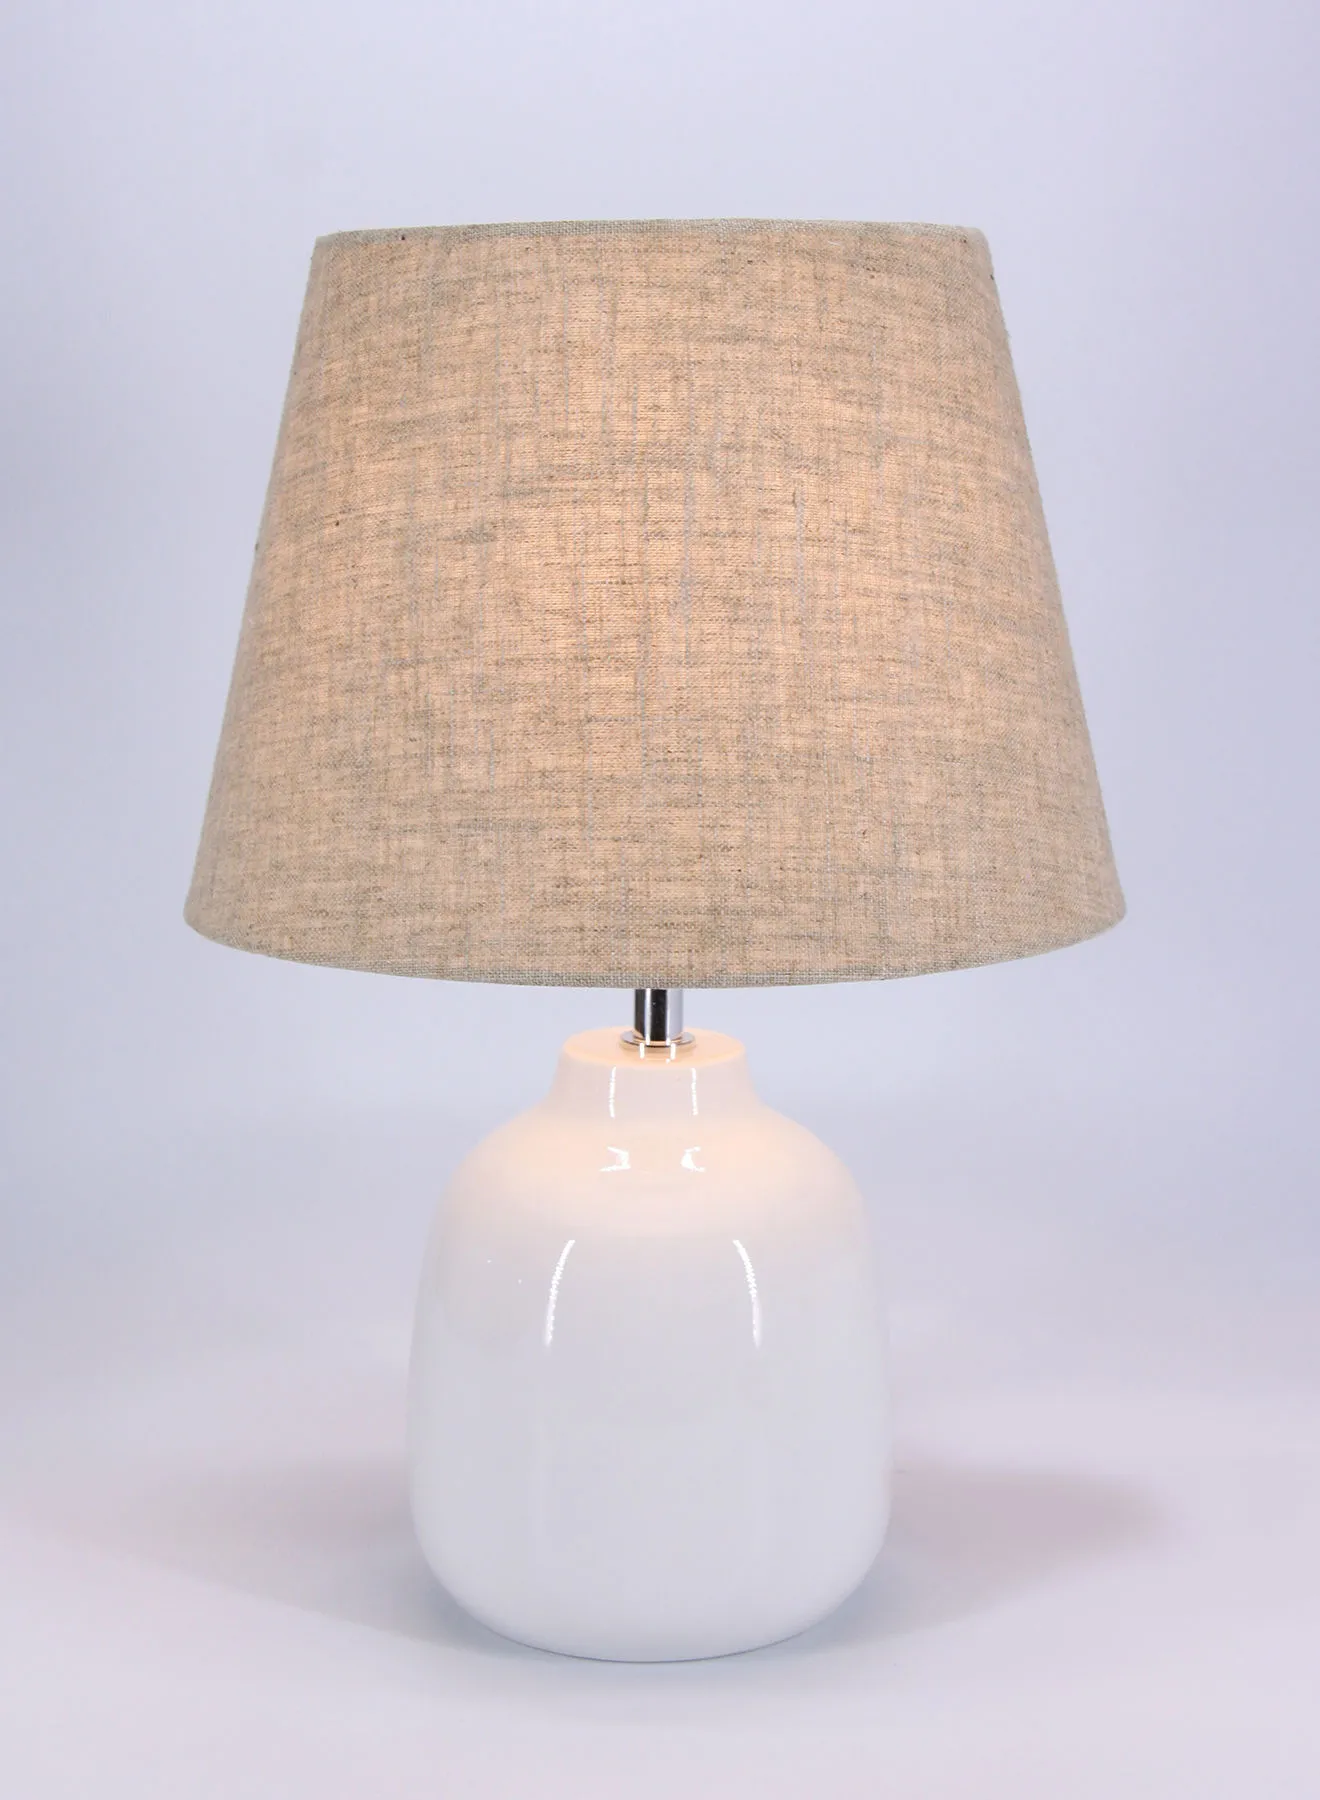 ebb & flow Nayn Ceramic Table Lamp | Lampshade Unique Luxury Quality Material for the Perfect Stylish Home D191-69 White 30 x 30 x 43